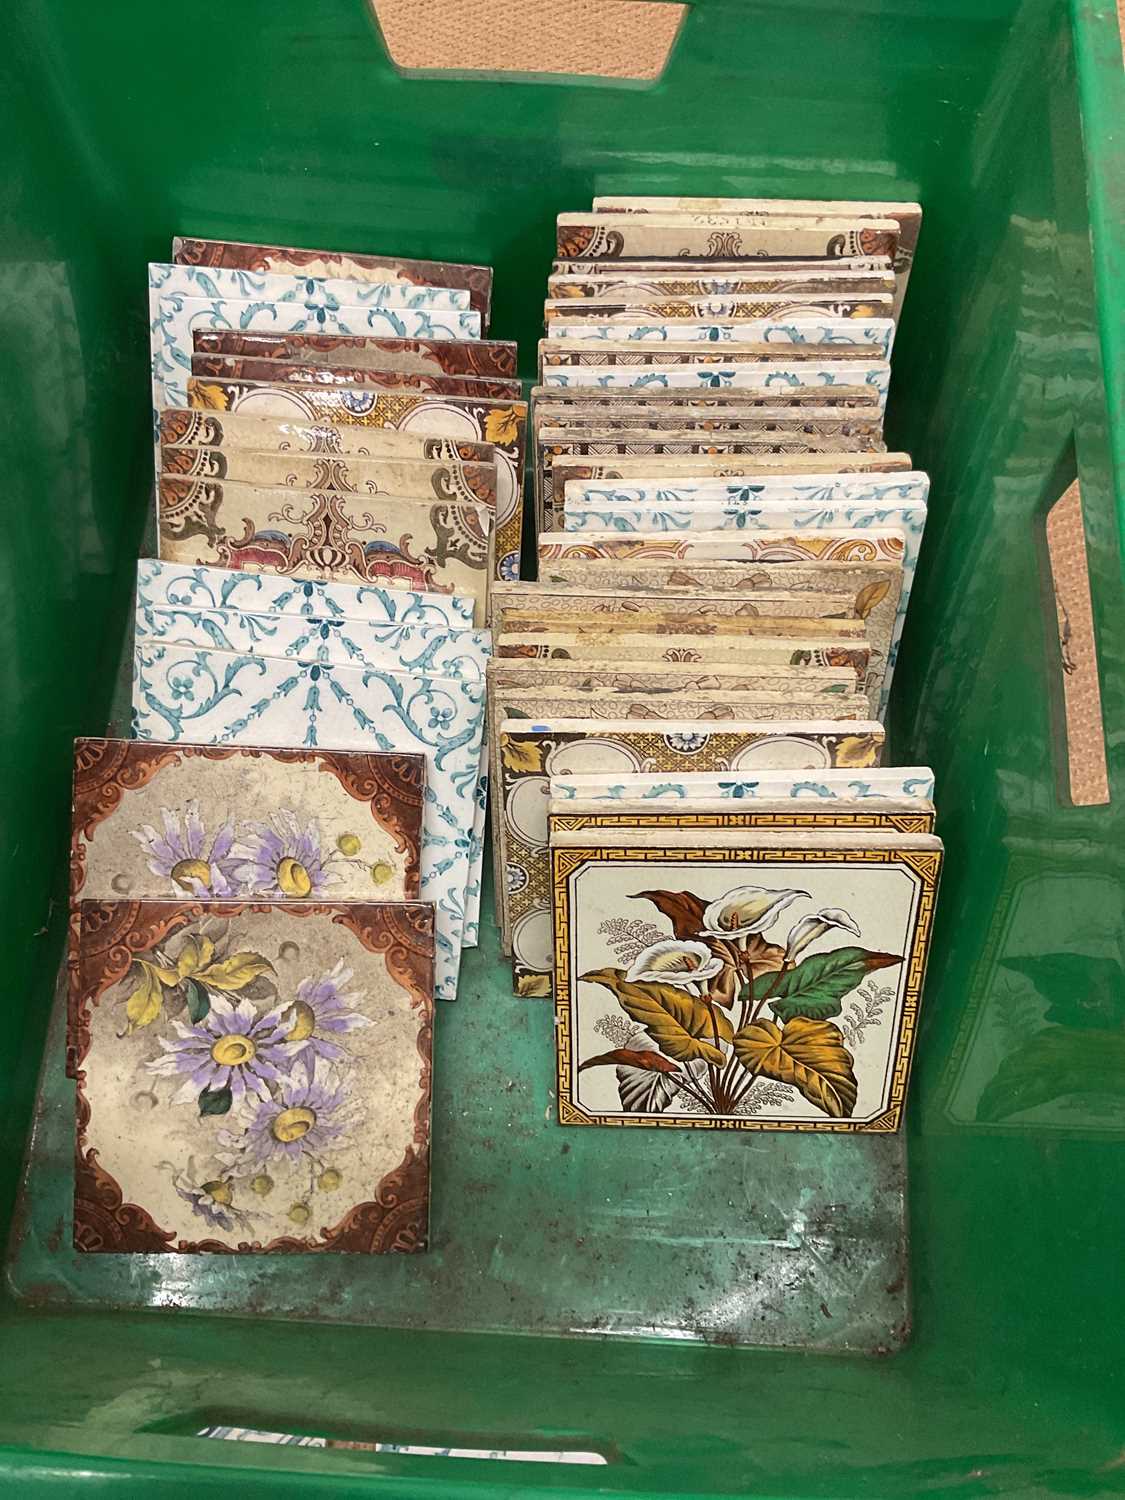 A quantity of 19th century tiles with various floral patterns, each 15.5 x 15.5cm. - Image 2 of 4